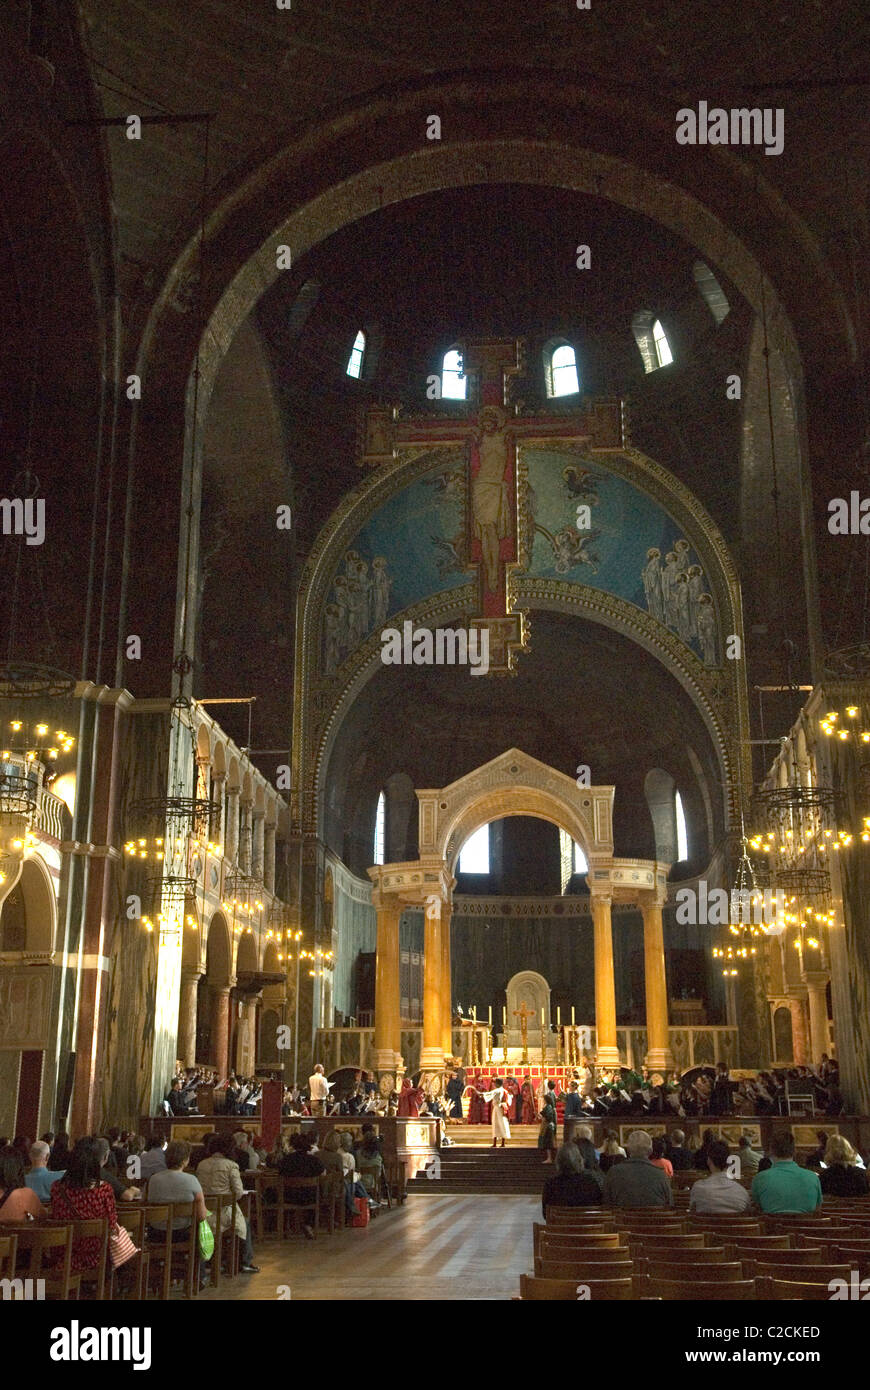 Westminster Roman Catholic Cathedral Victoria London. Uk. School children perform an Easter play. 2011  2010s HOMER SYKES Stock Photo